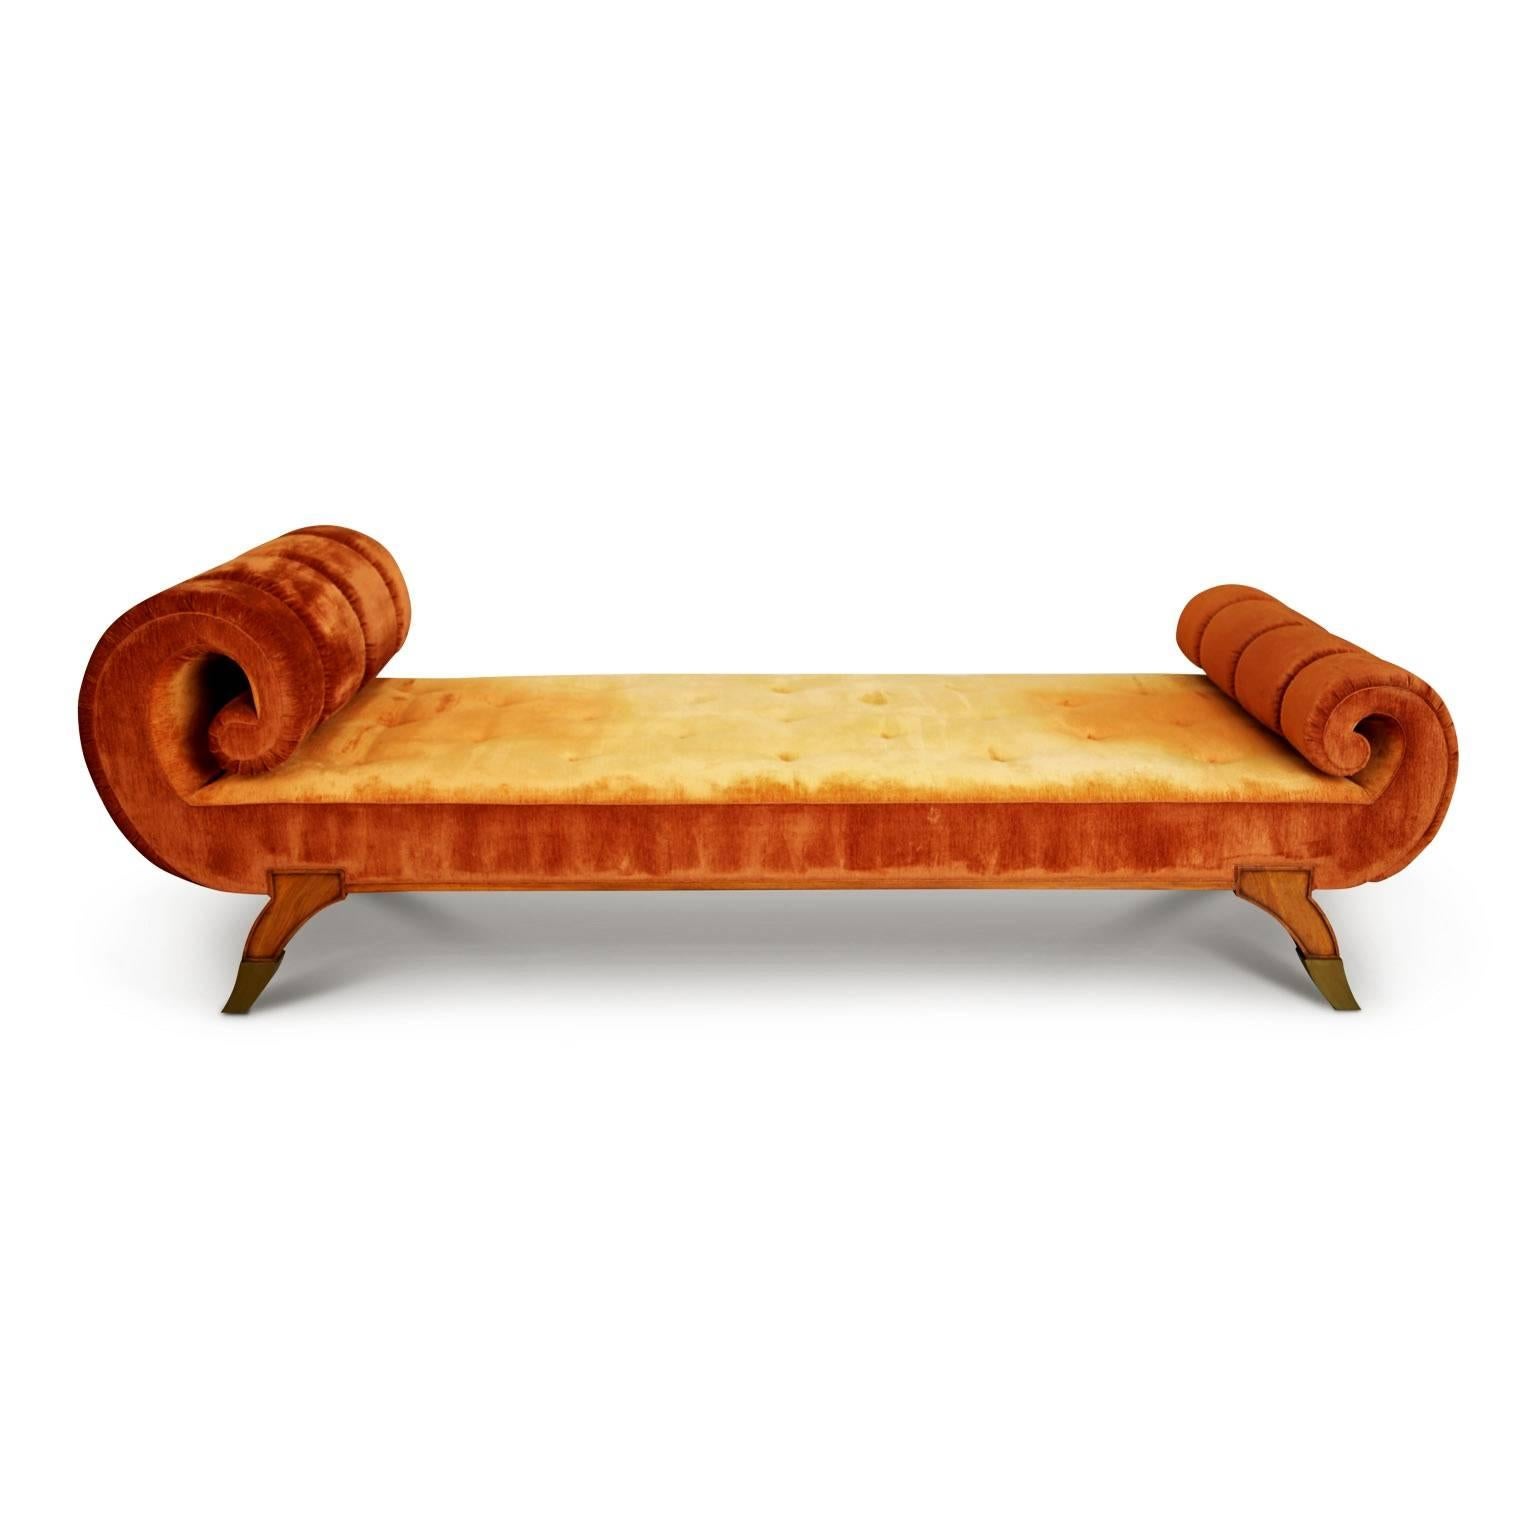 Sprawl out on this grandly proportioned Louis XVI style daybed. This extraordinary French style chaise longue features button tufting detail across the seat flanked by two curvaceous channel tufted rolled arms either end, the largest being at the